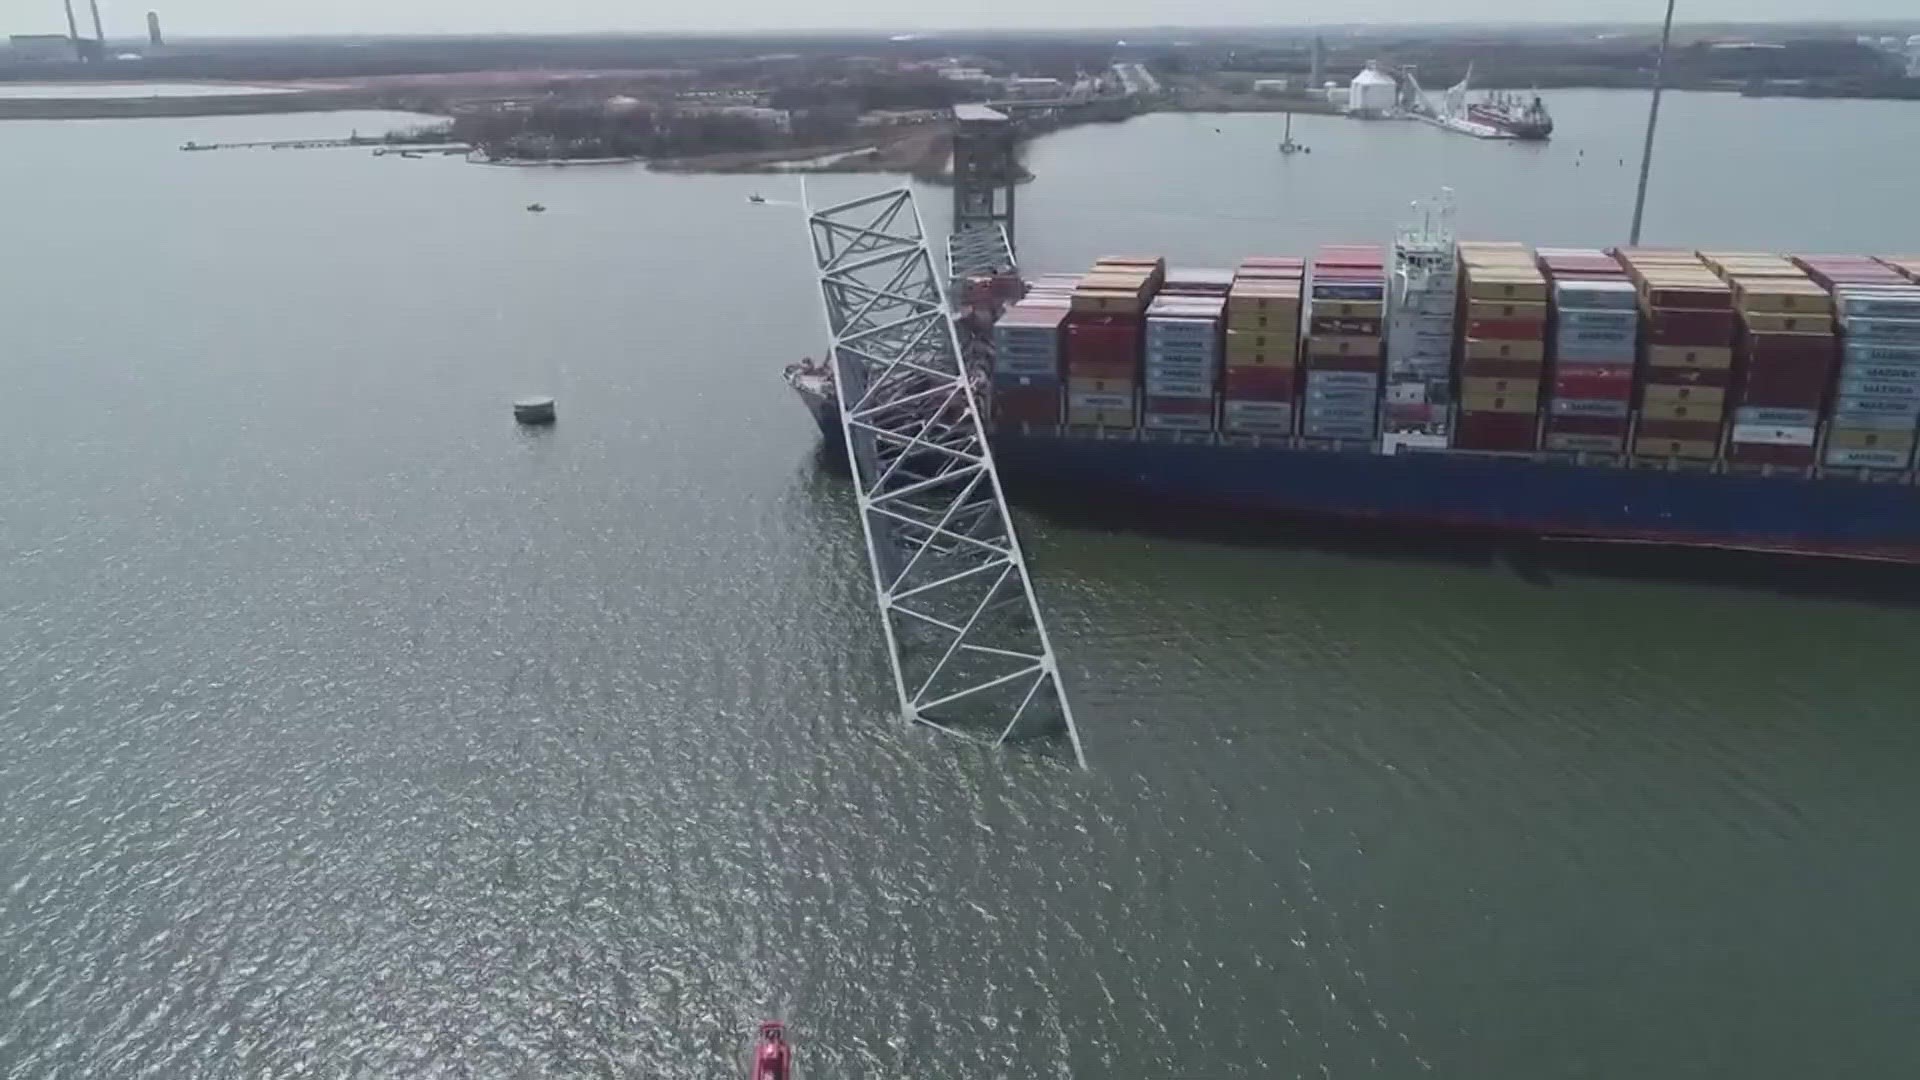 Transportation officials are looking for a solution that will continue to allow cargo in and out of the major port.